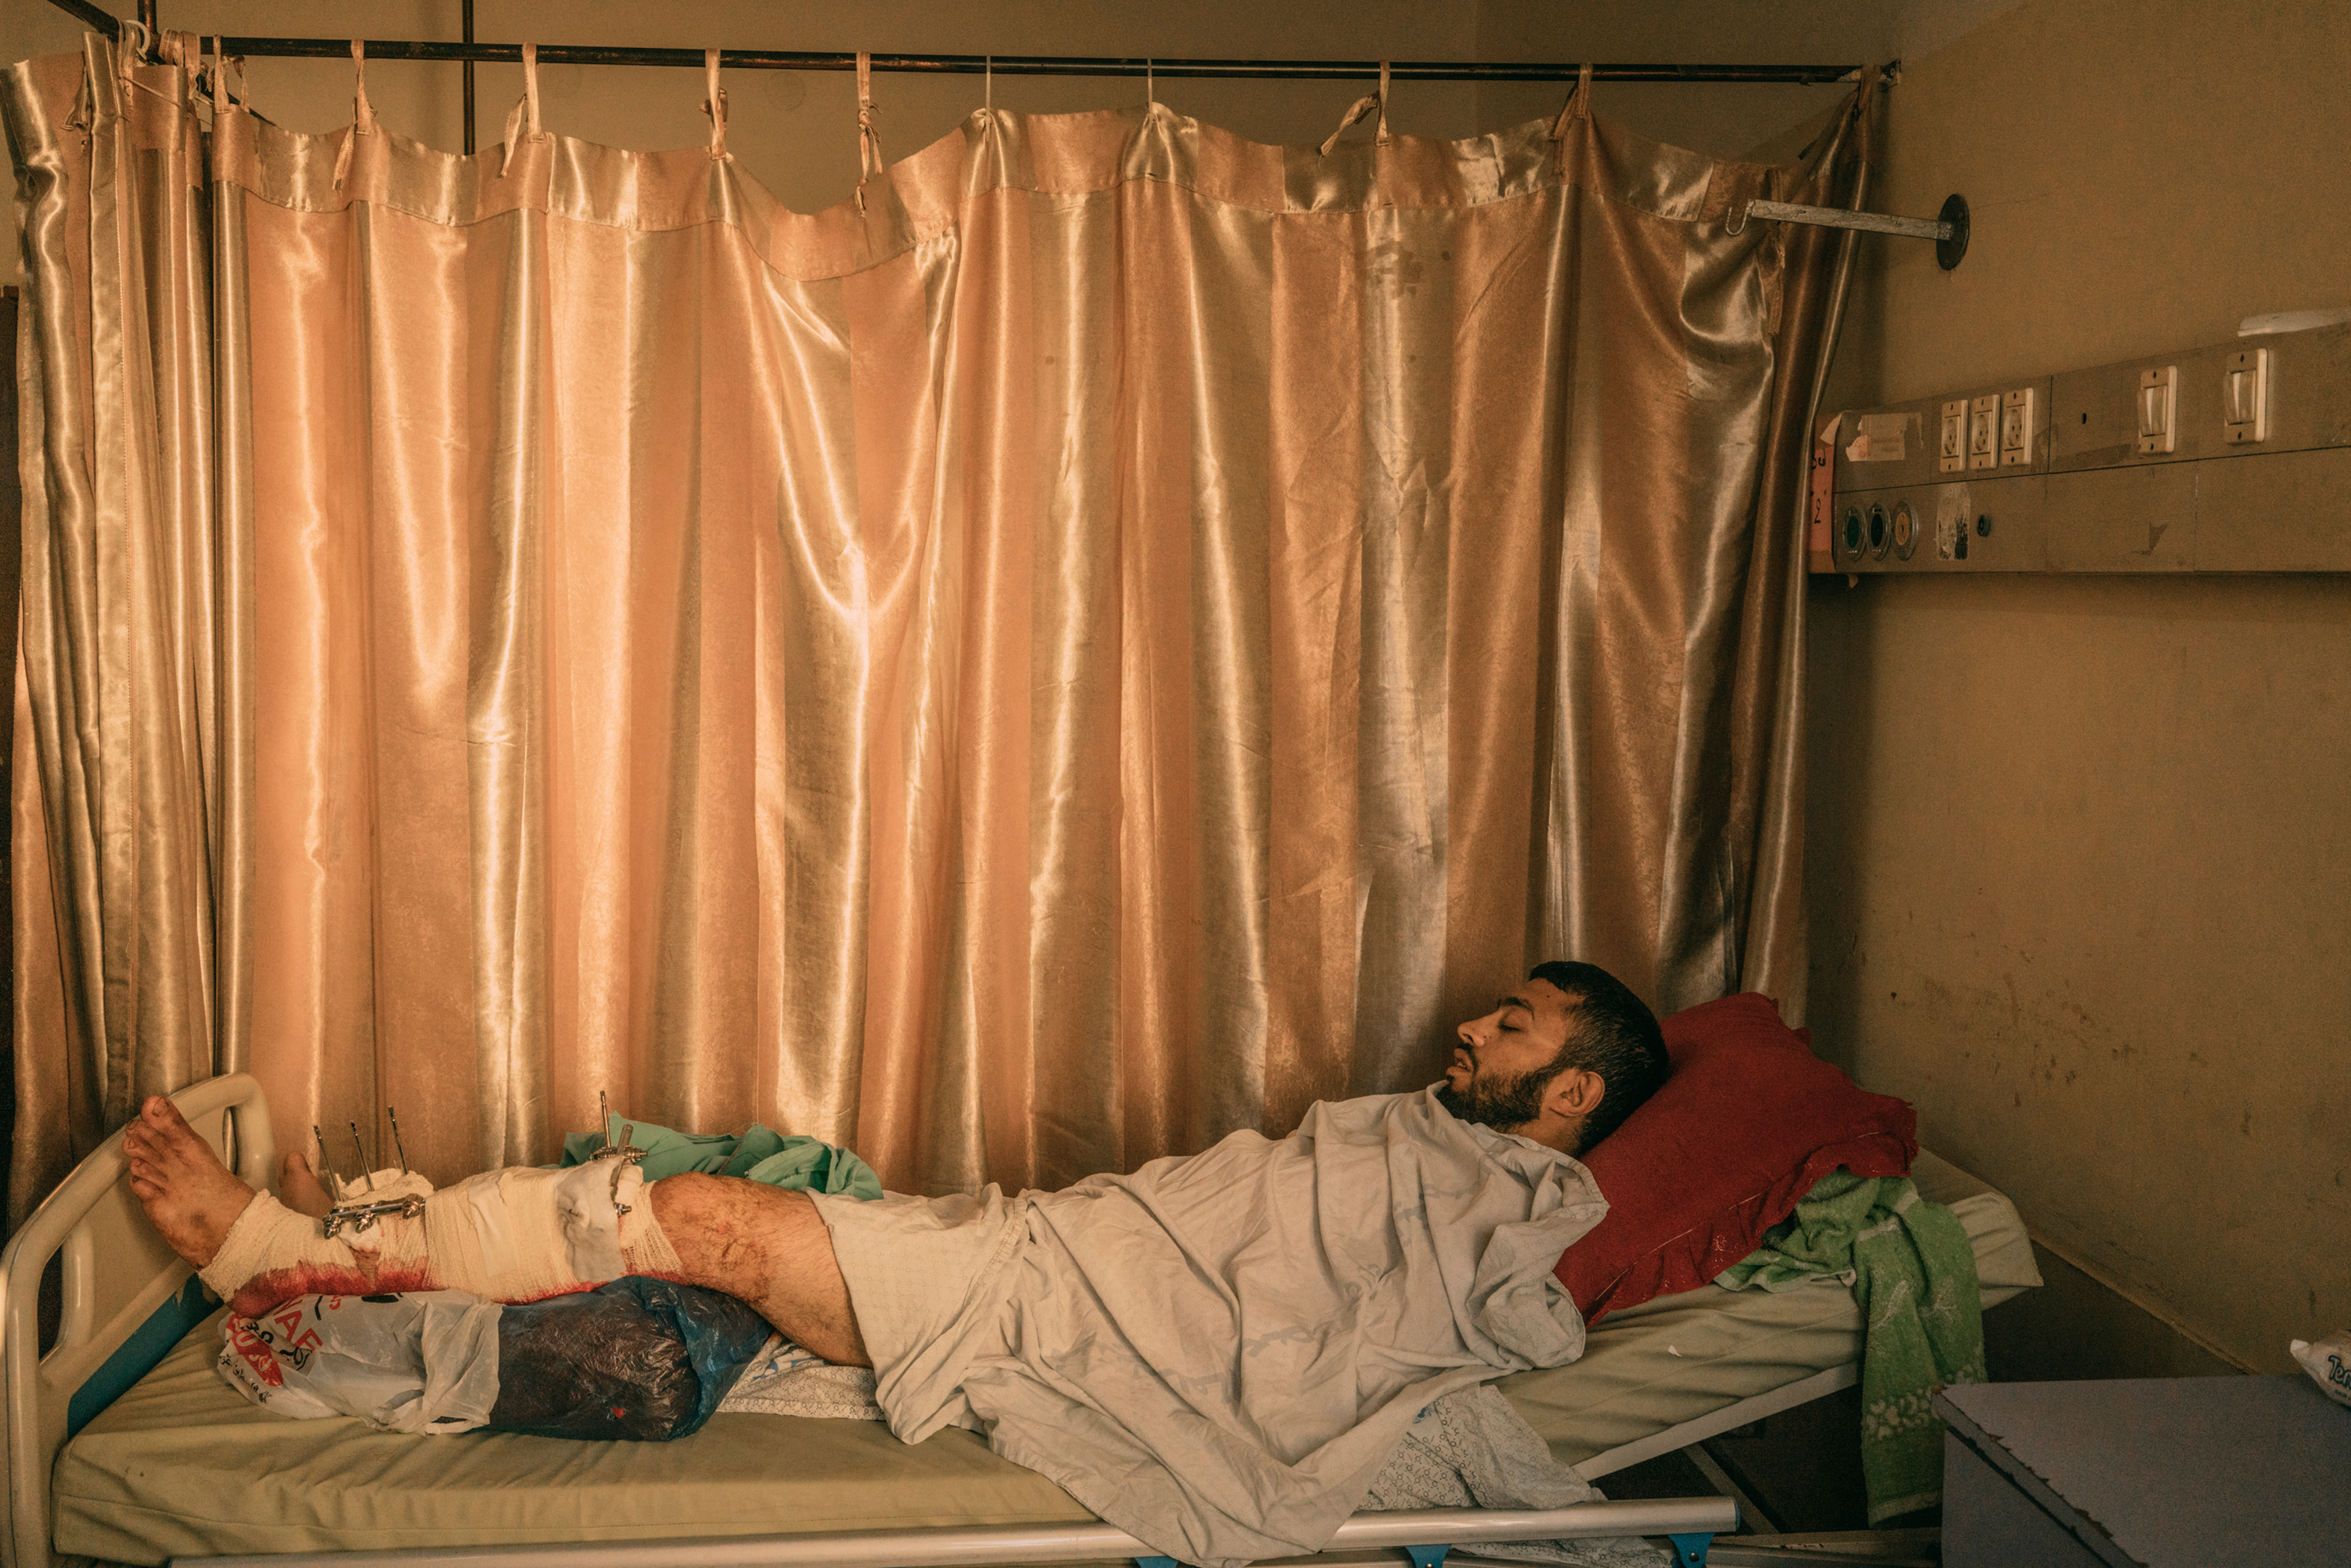 Ibrahim Dahir, 32, whose left leg was injured by Israeli troops during the protest, lays in a bed at Shifa Hospital in Gaza City. (Emanuele Satolli for TIME)